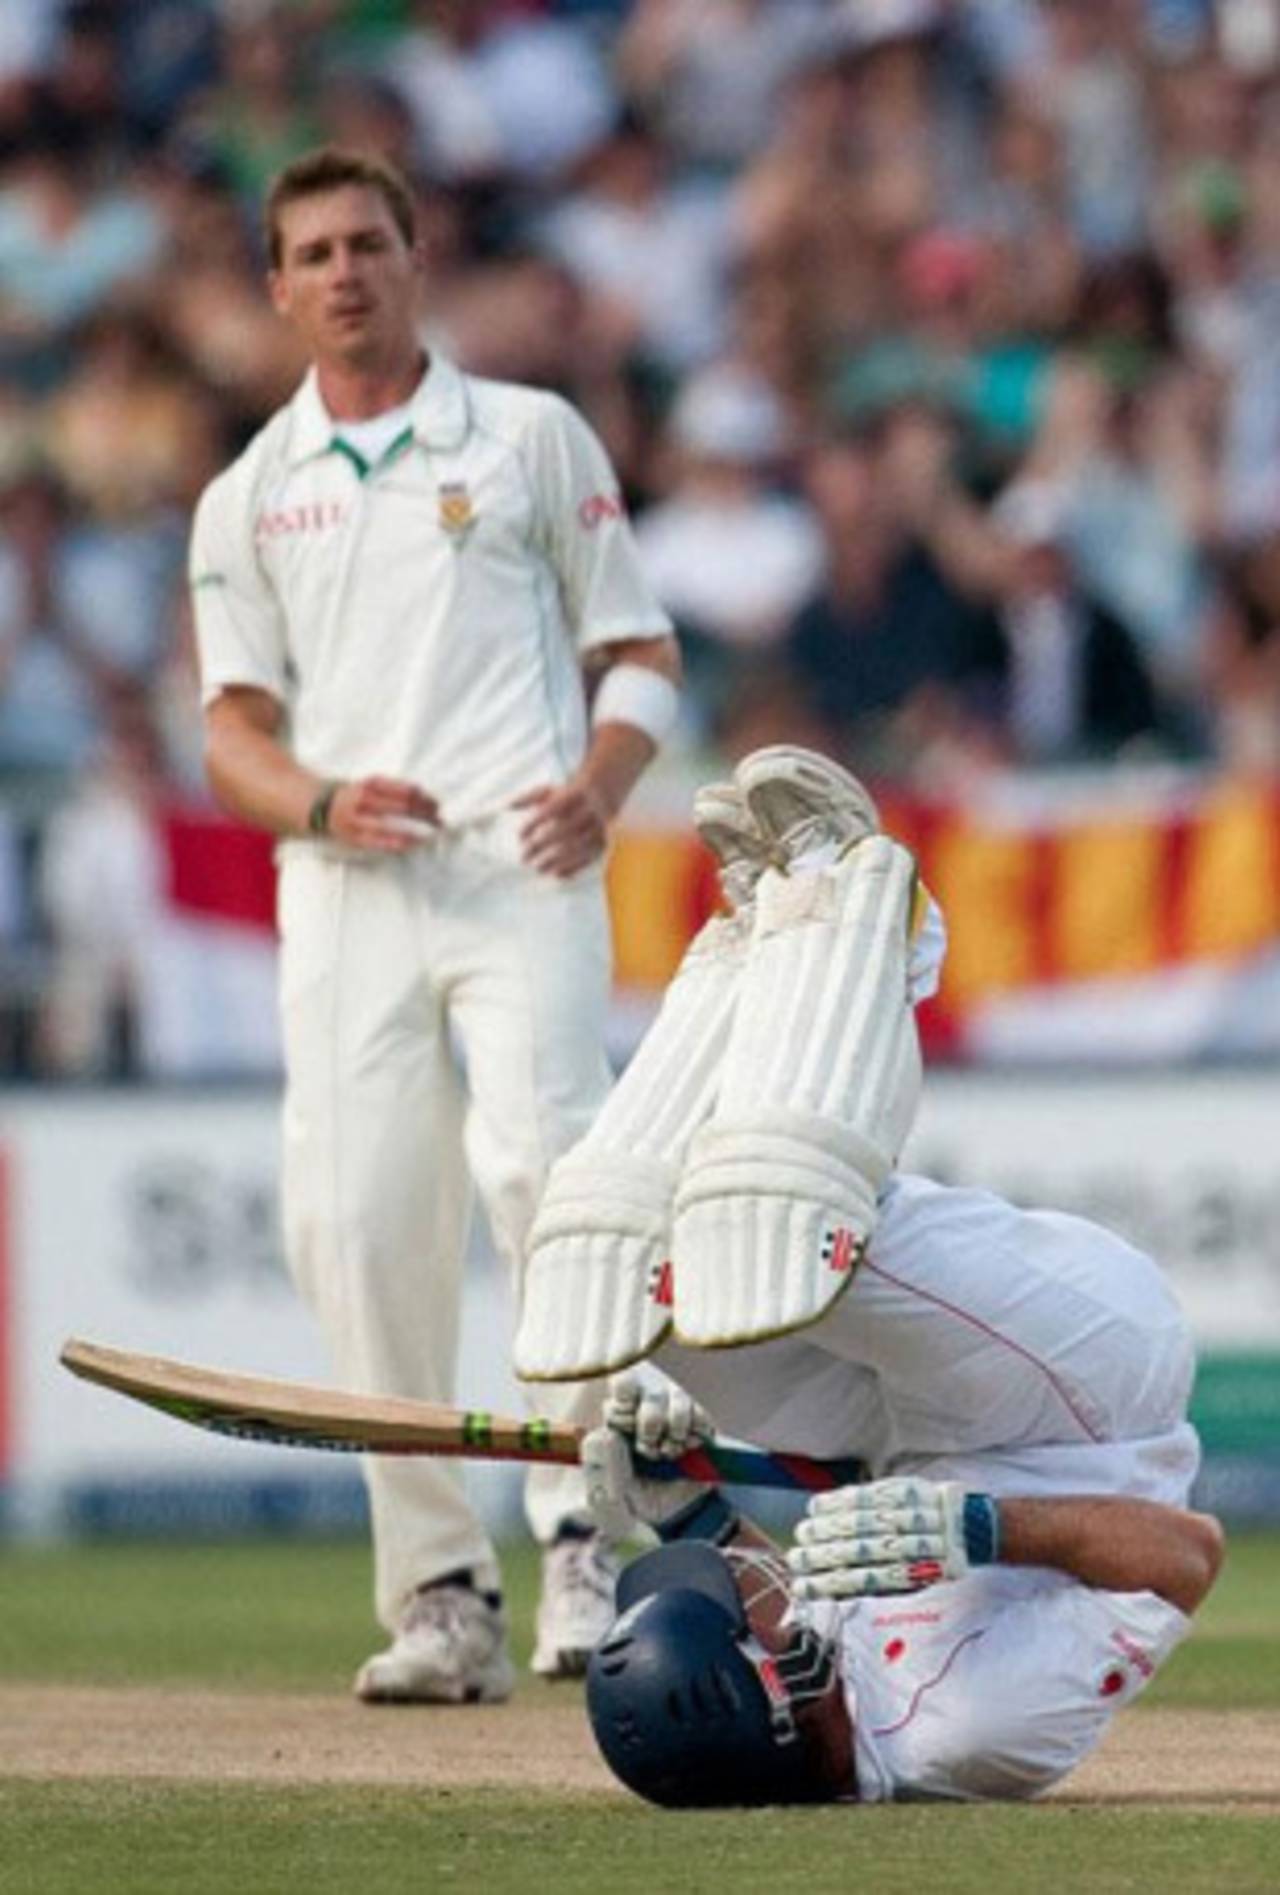 In diminishing light, Dale Steyn fired in a bouncer that left Andrew Strauss on his backside, 4th Test, South Africa v England, Johannesburg, 16 January, 2010 
